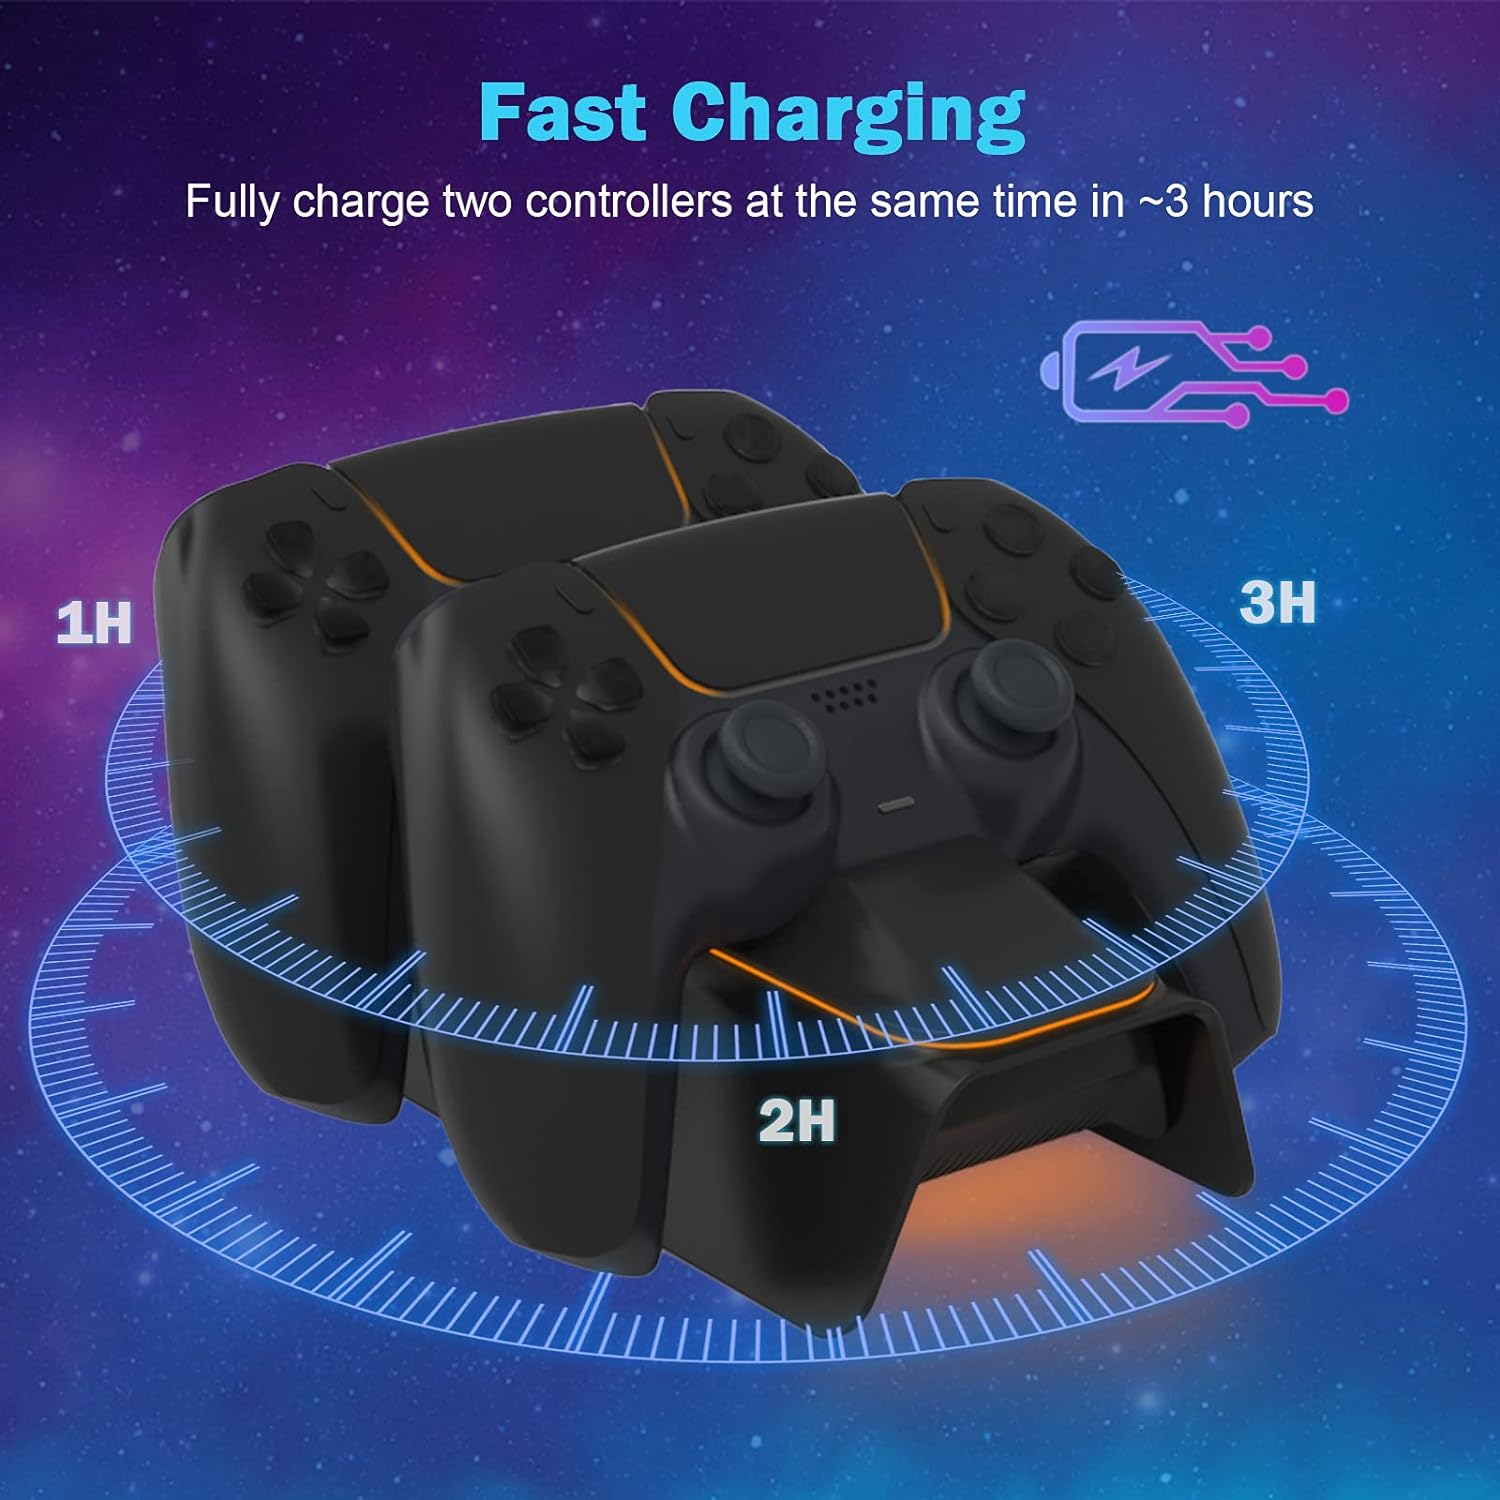 NexiGo PS5 Controller Charging Station, PS5 Charging Station 2 Hours Quick Charging with Power Supply for Playstation 5 Charging Station, PS5 Charging Station Controller for Playstation 5 Wireless Controller, Black